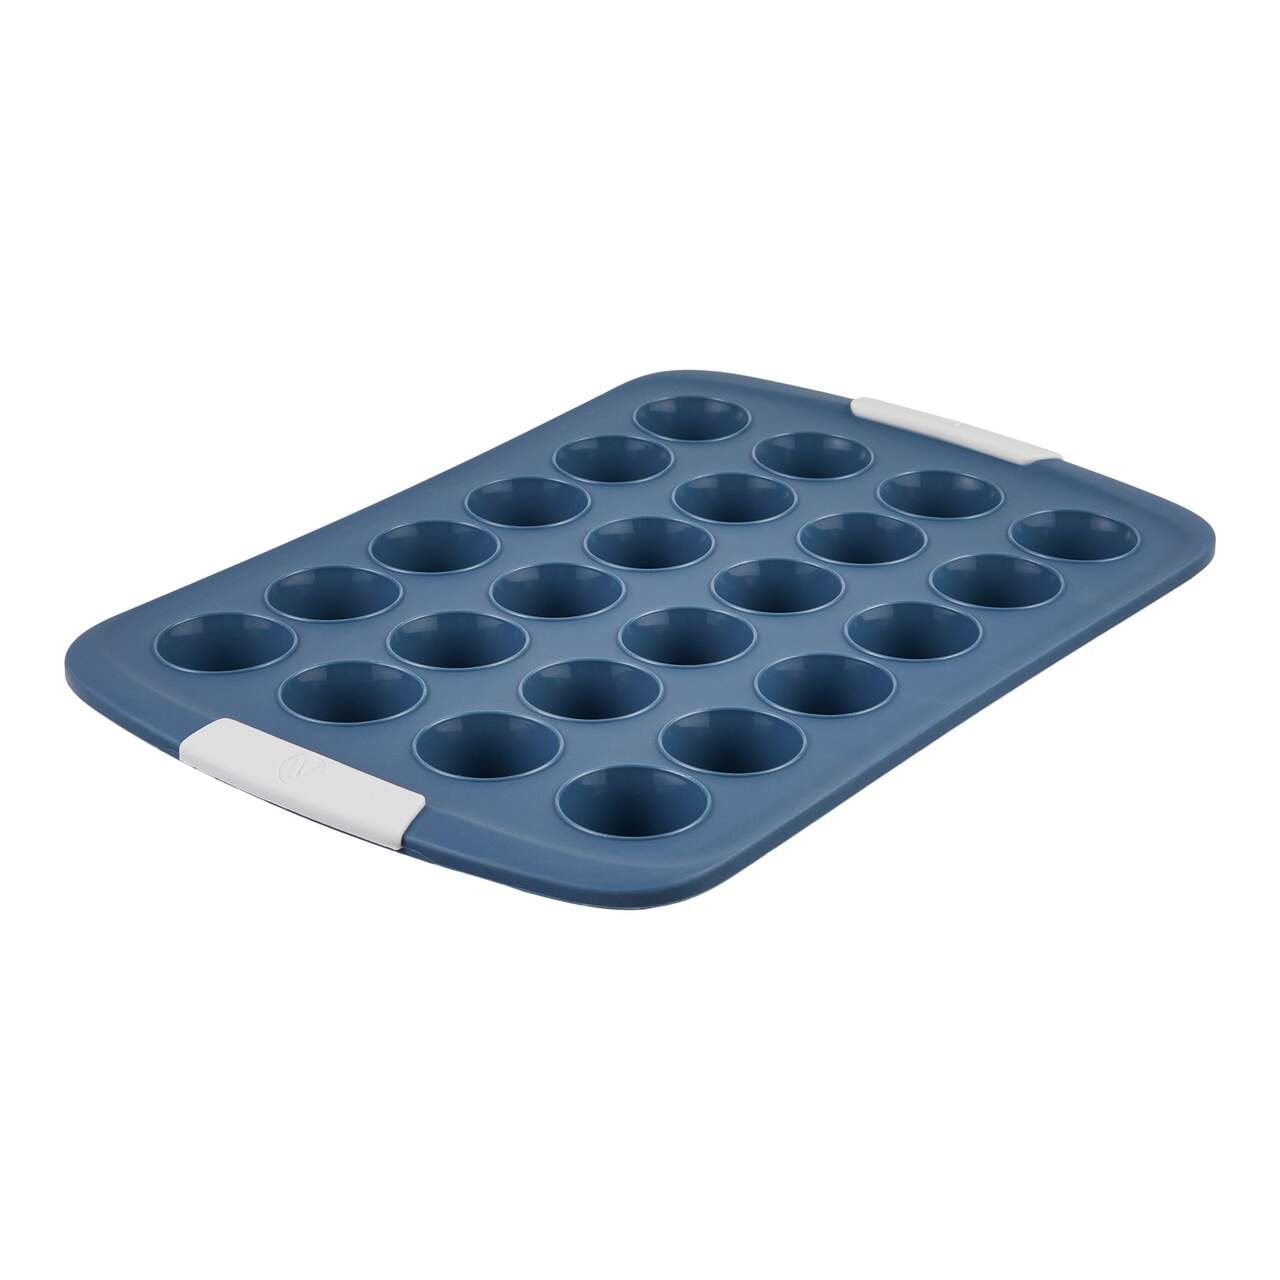 https://media-www.canadiantire.ca/product/living/kitchen/bakeware-baking-prep/1429690/vida-silicone-with-structure-mini-muffin-pan-7be11c75-c0ce-4d38-9d7a-393c0dc7775c-jpgrendition.jpg?imdensity=1&imwidth=640&impolicy=mZoom